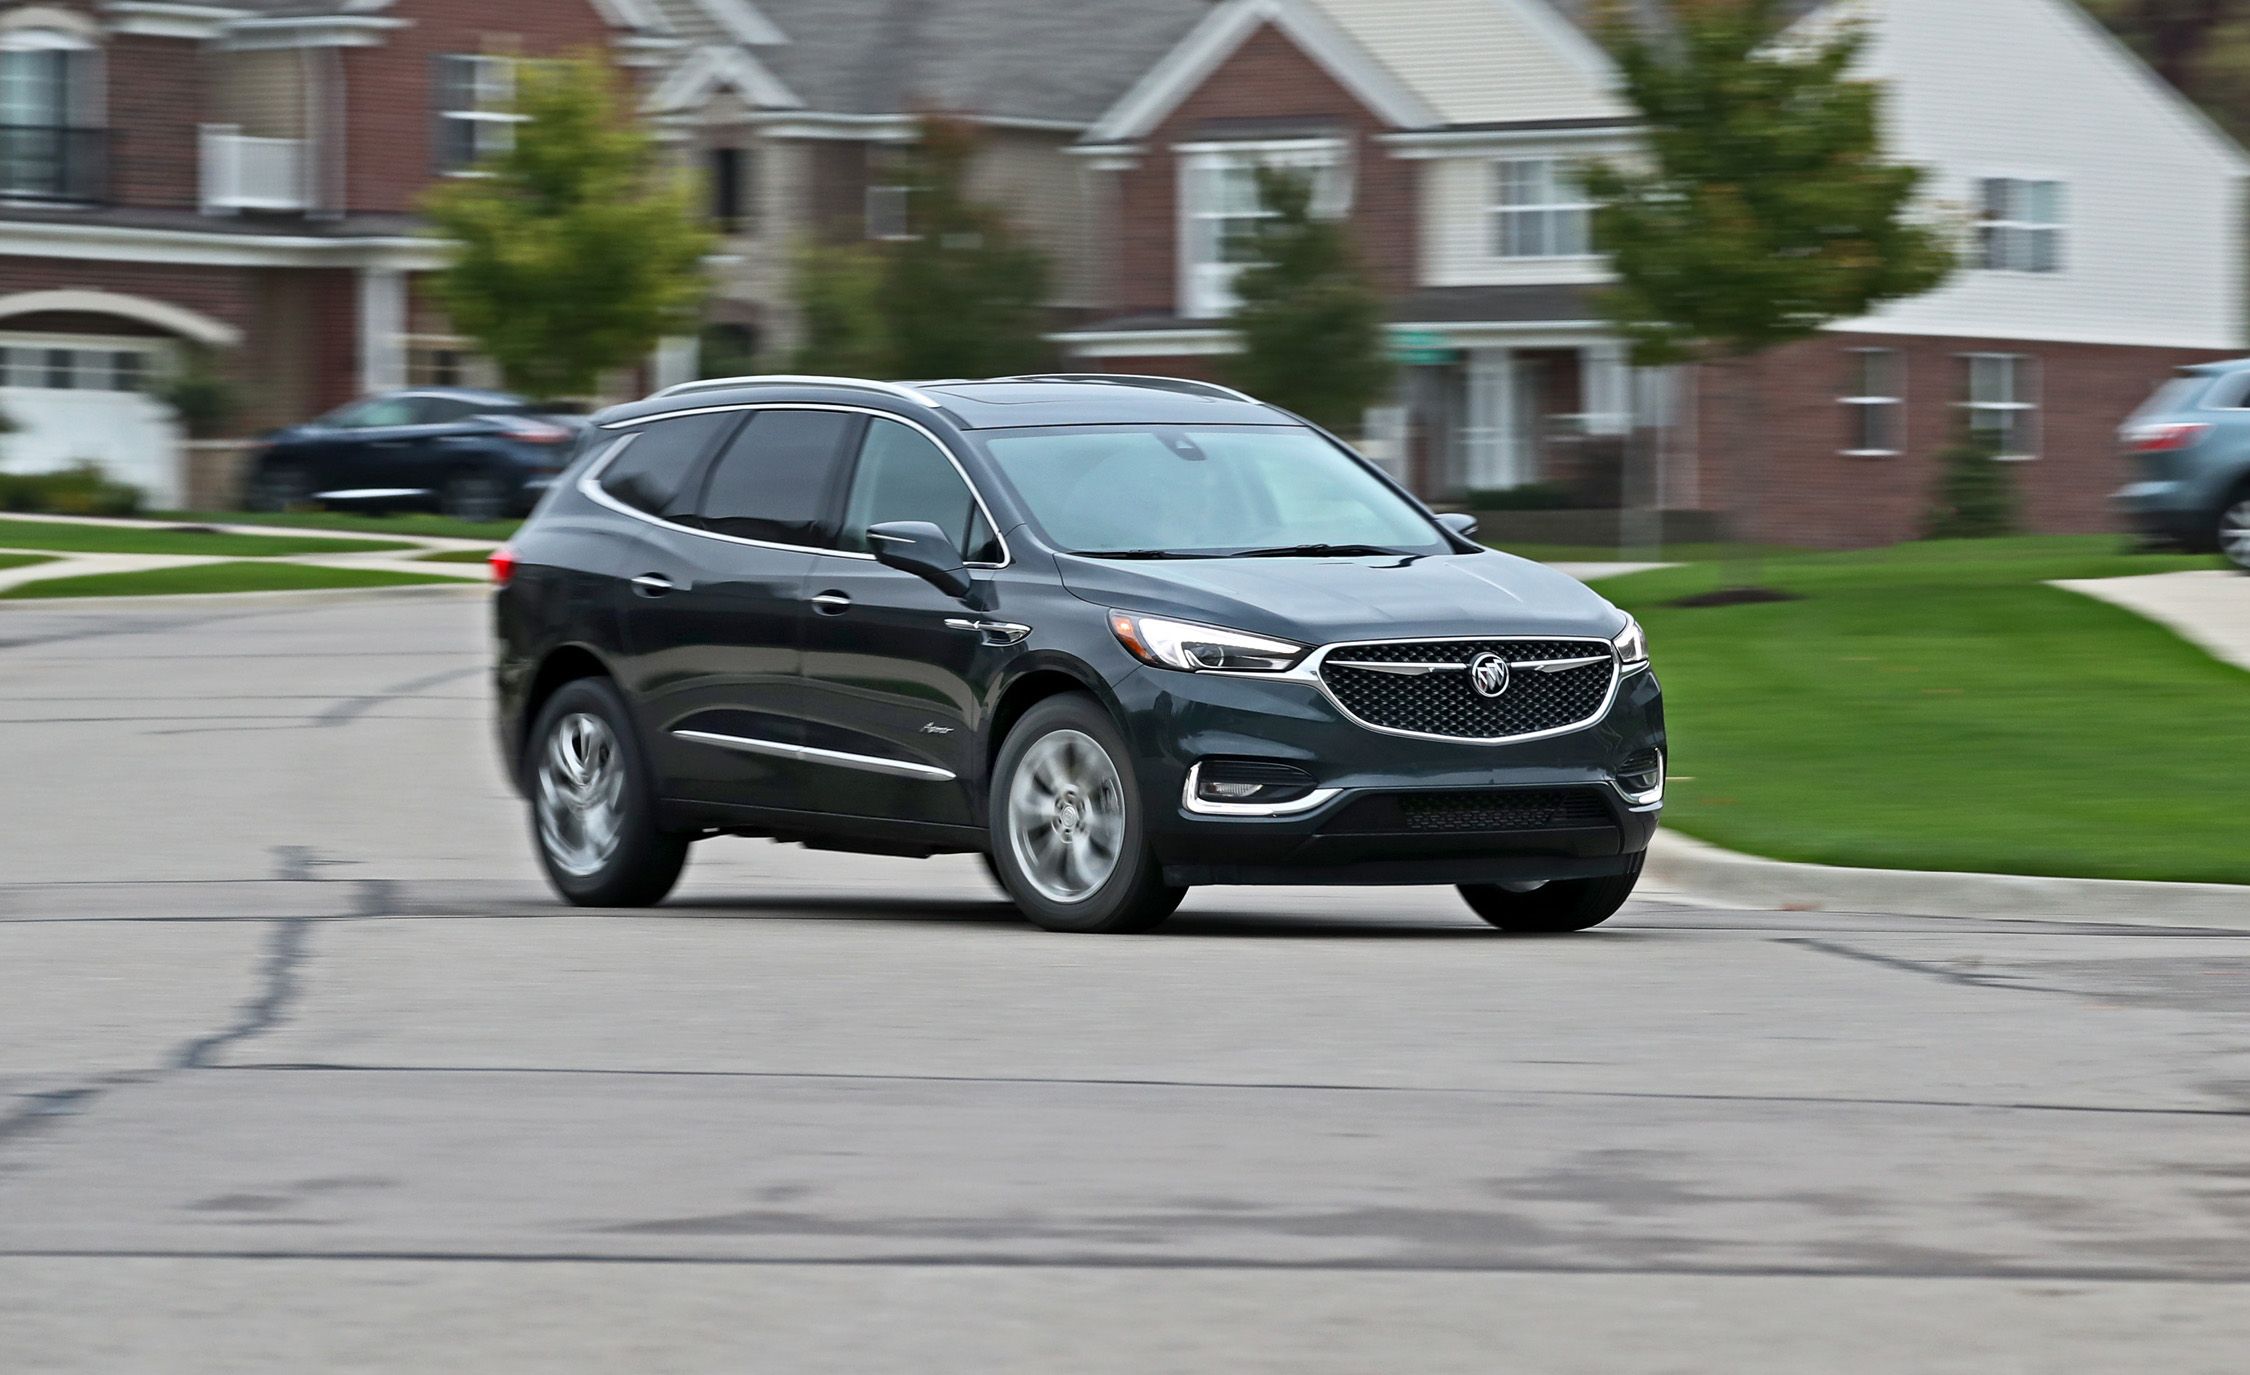 2018 Buick Enclave Test Review Car And Driver